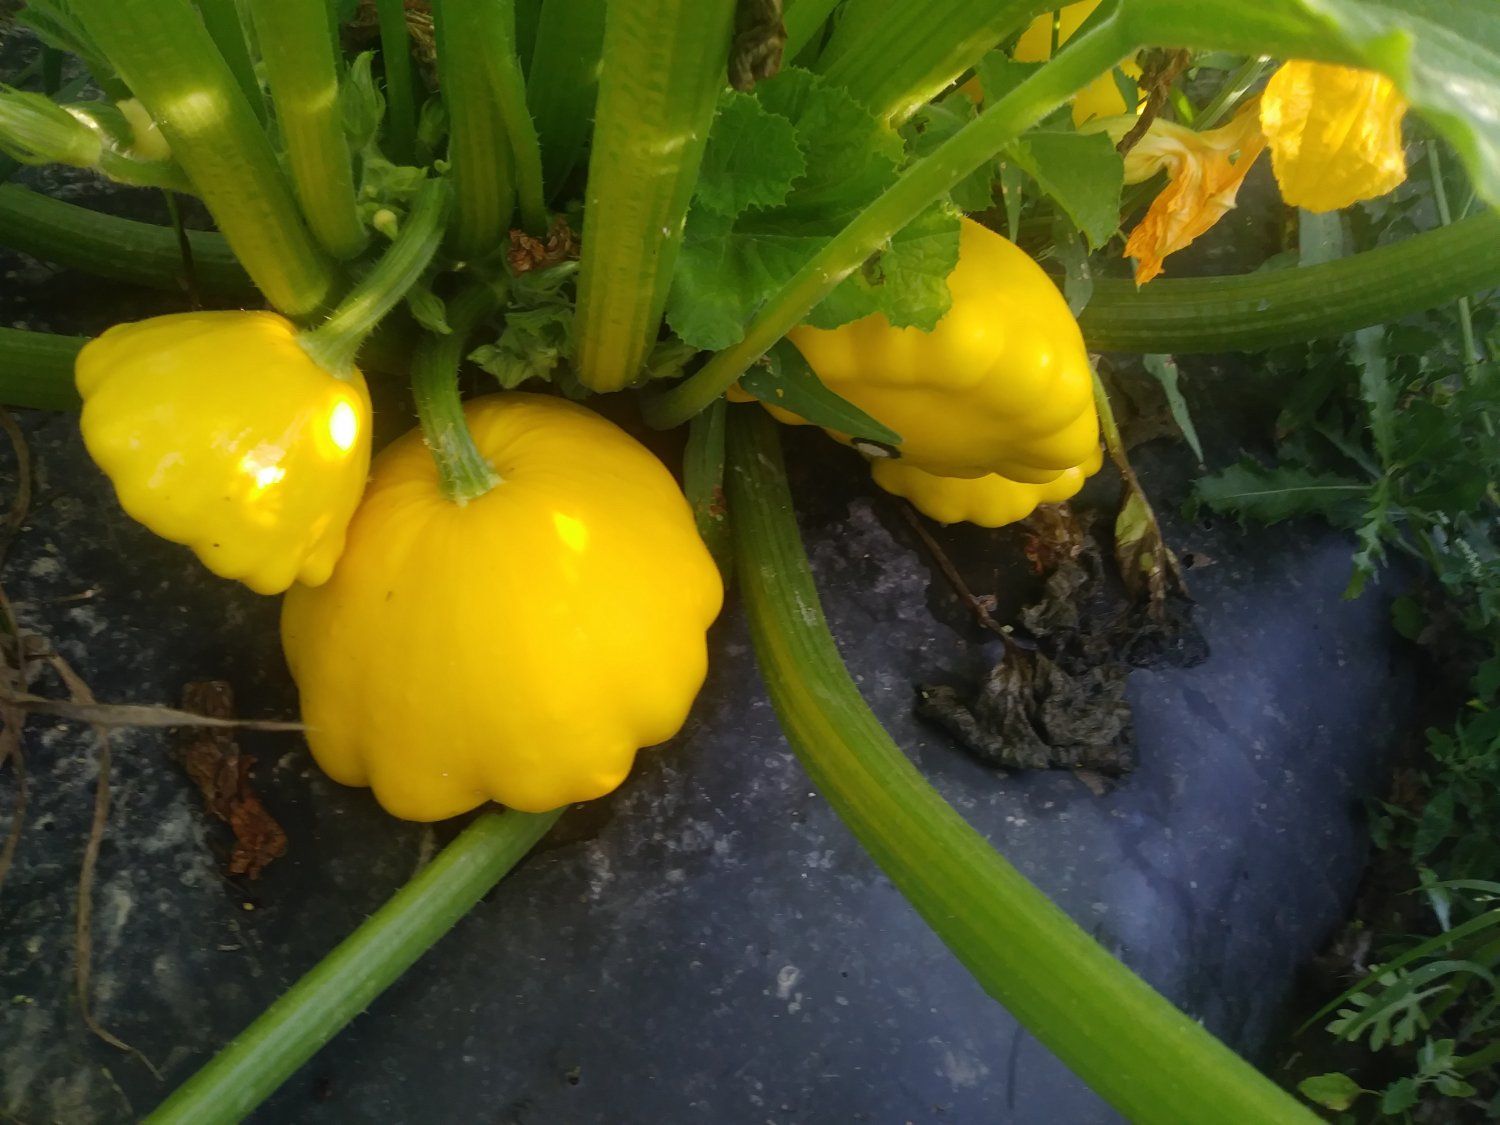 Farm Happenings for August 17, 2021 week 7 - The Patty Pan - demic